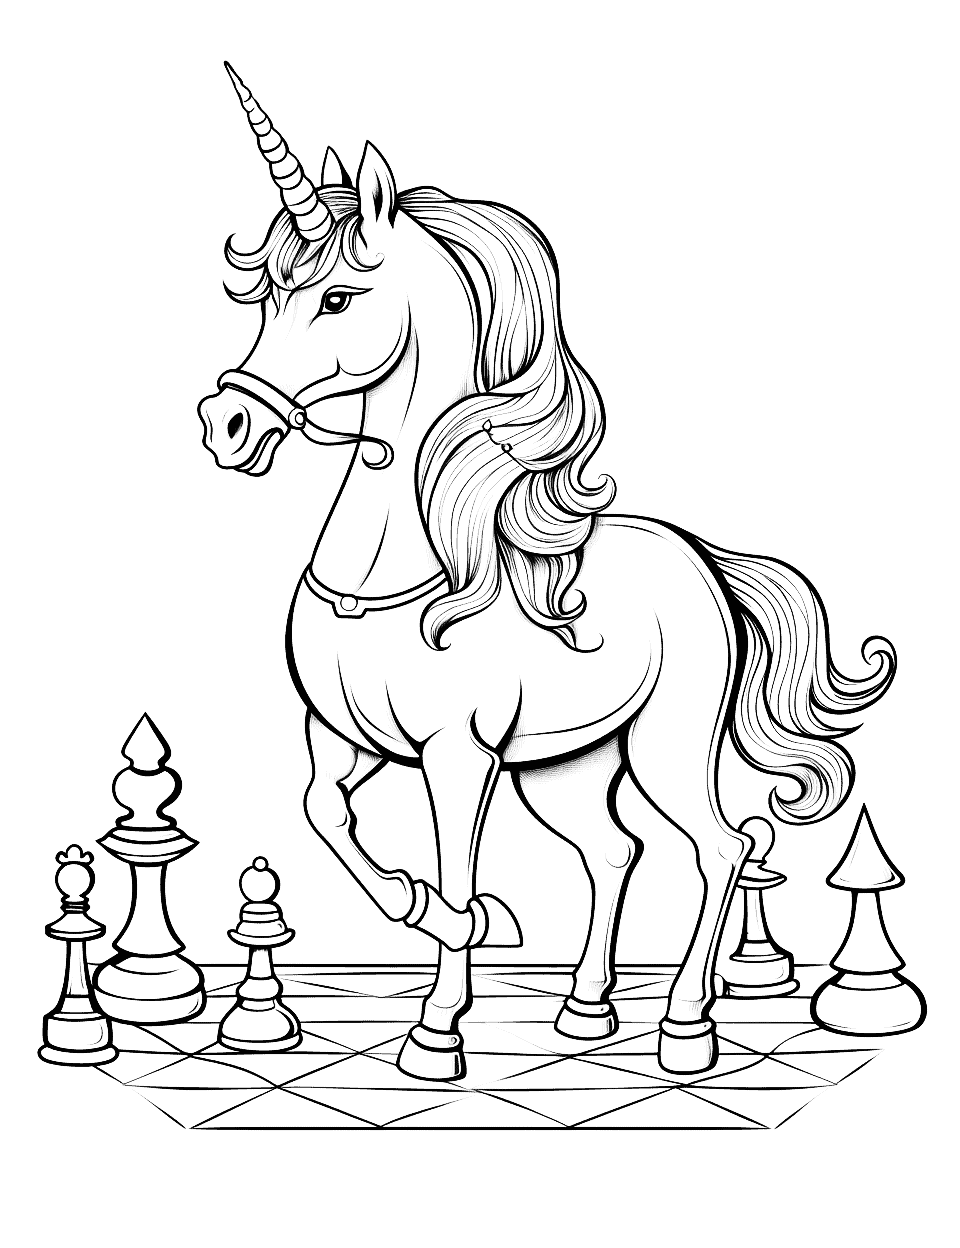 Unicorn and Chess Coloring Page - A unicorn playing a game of chess with detailed chess pieces and a chessboard.